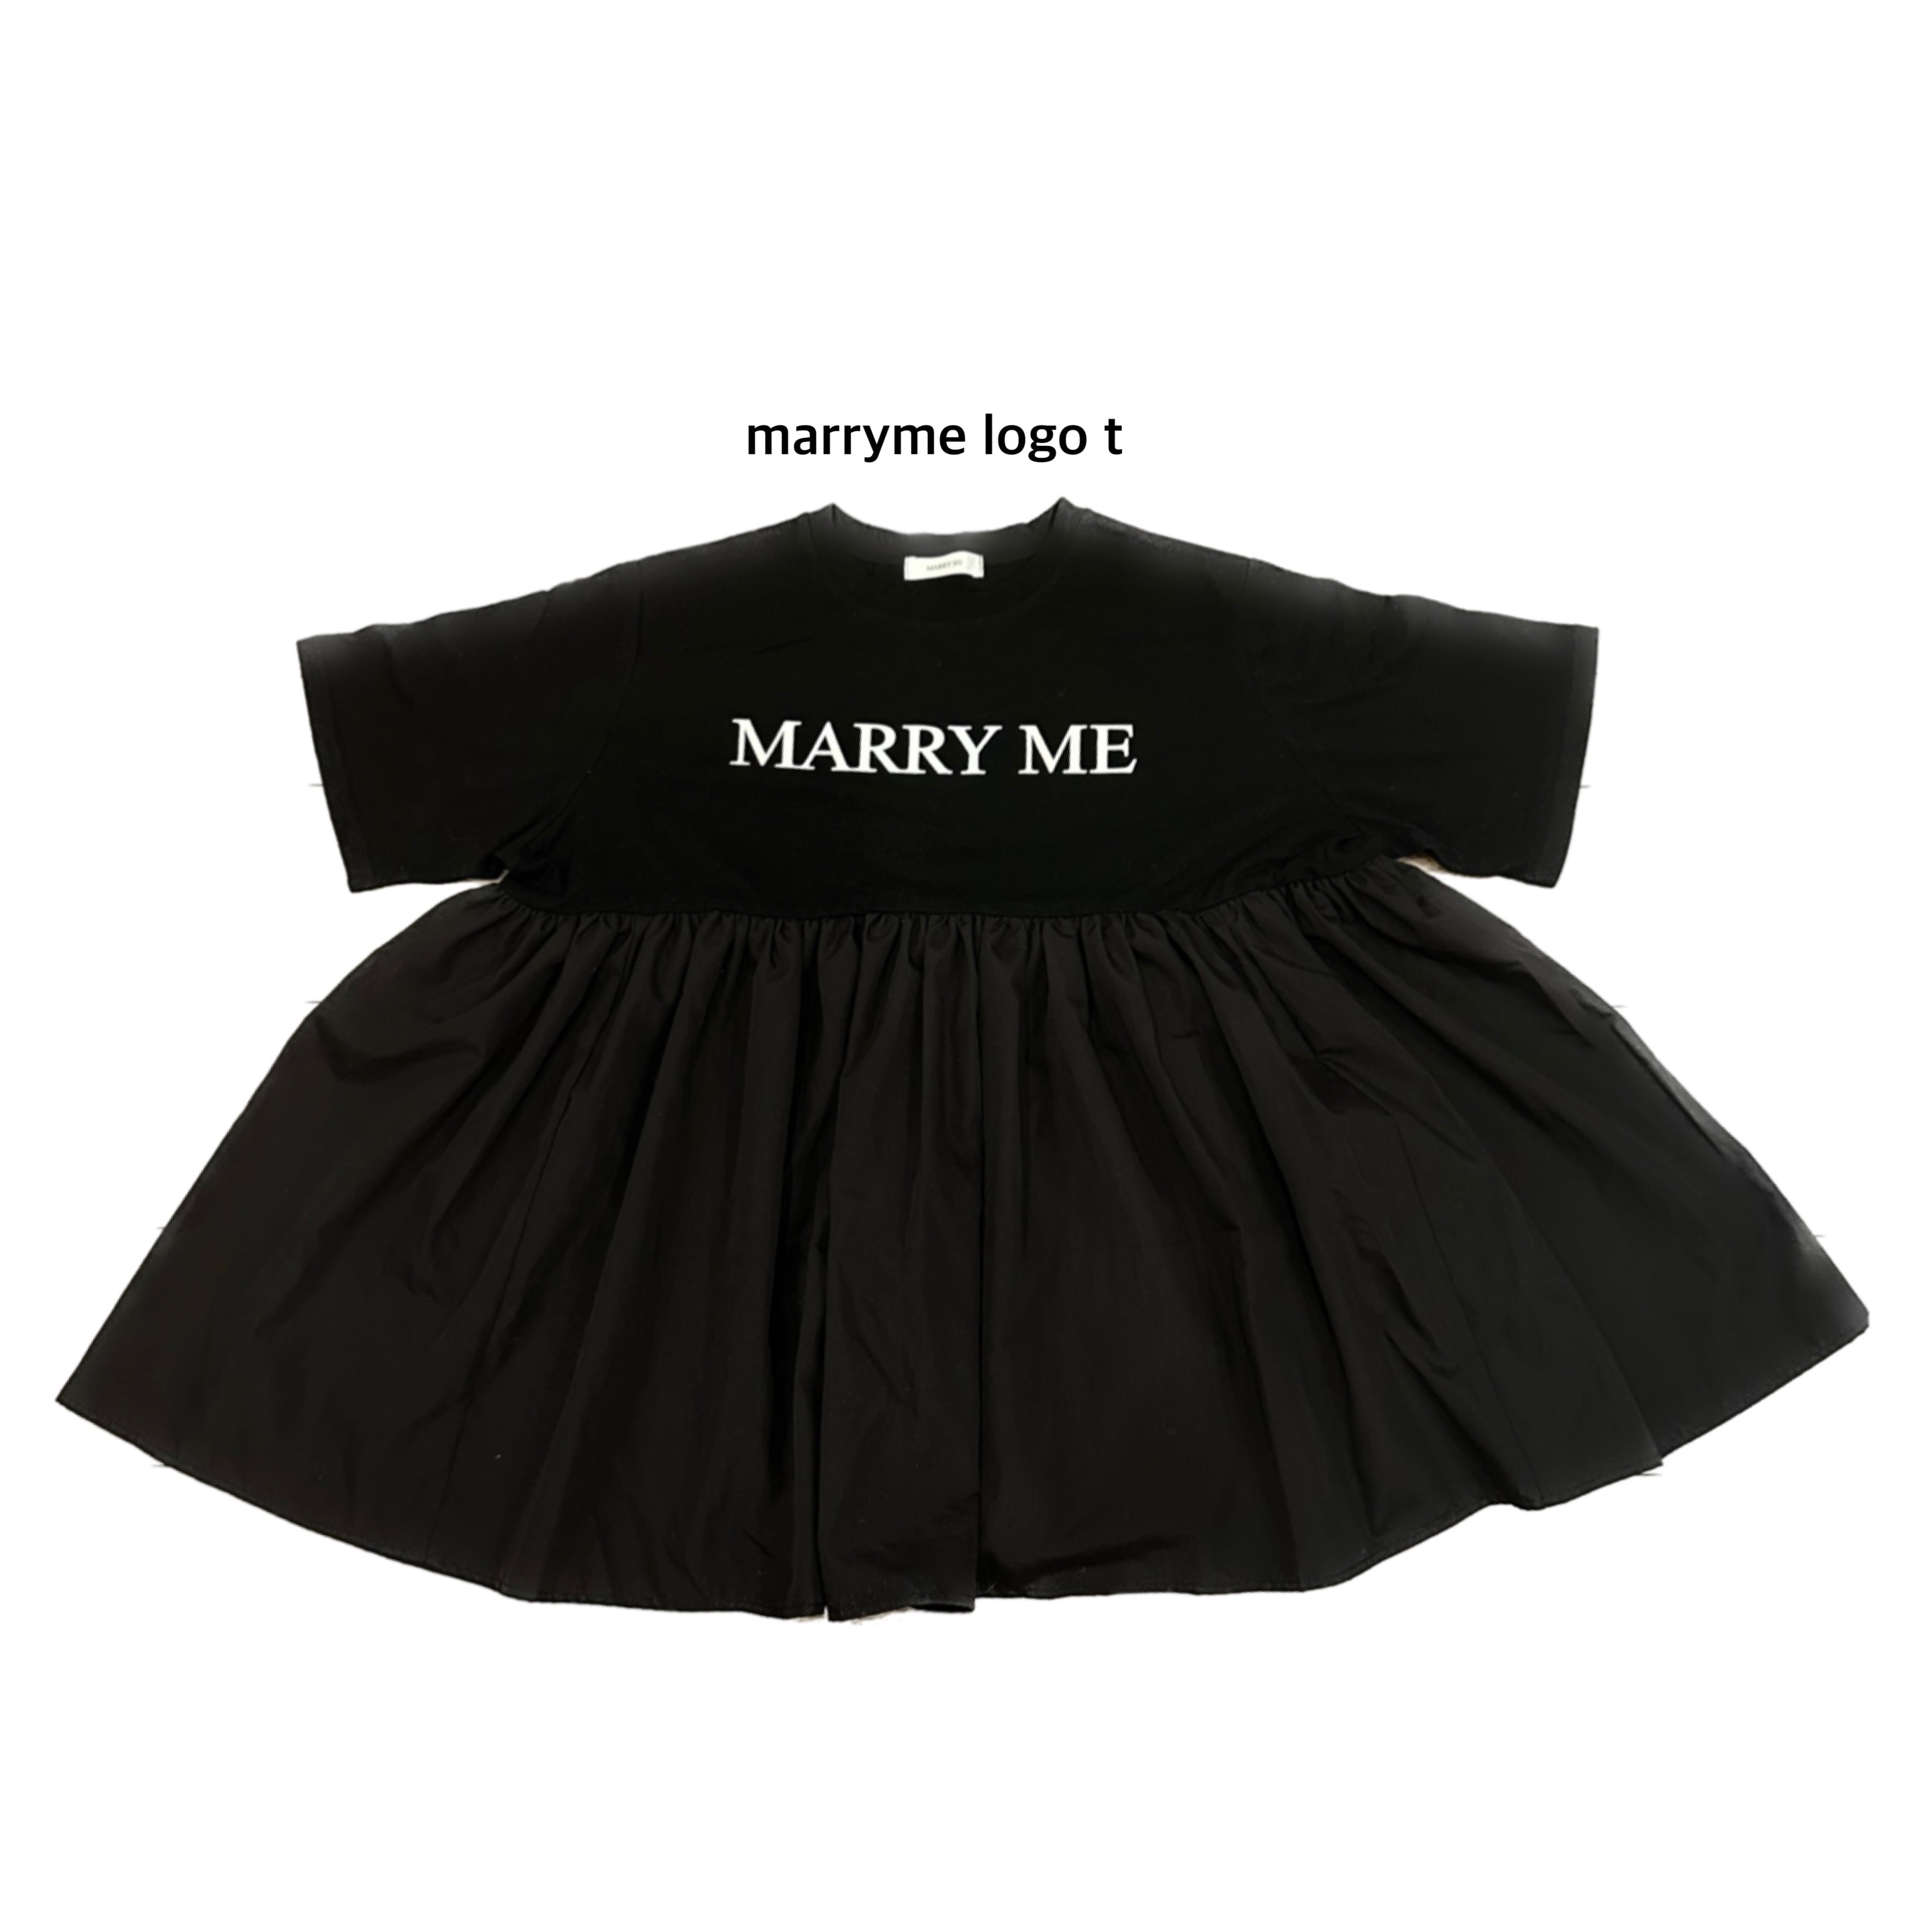 marryme logo t   MARRY ME.Official